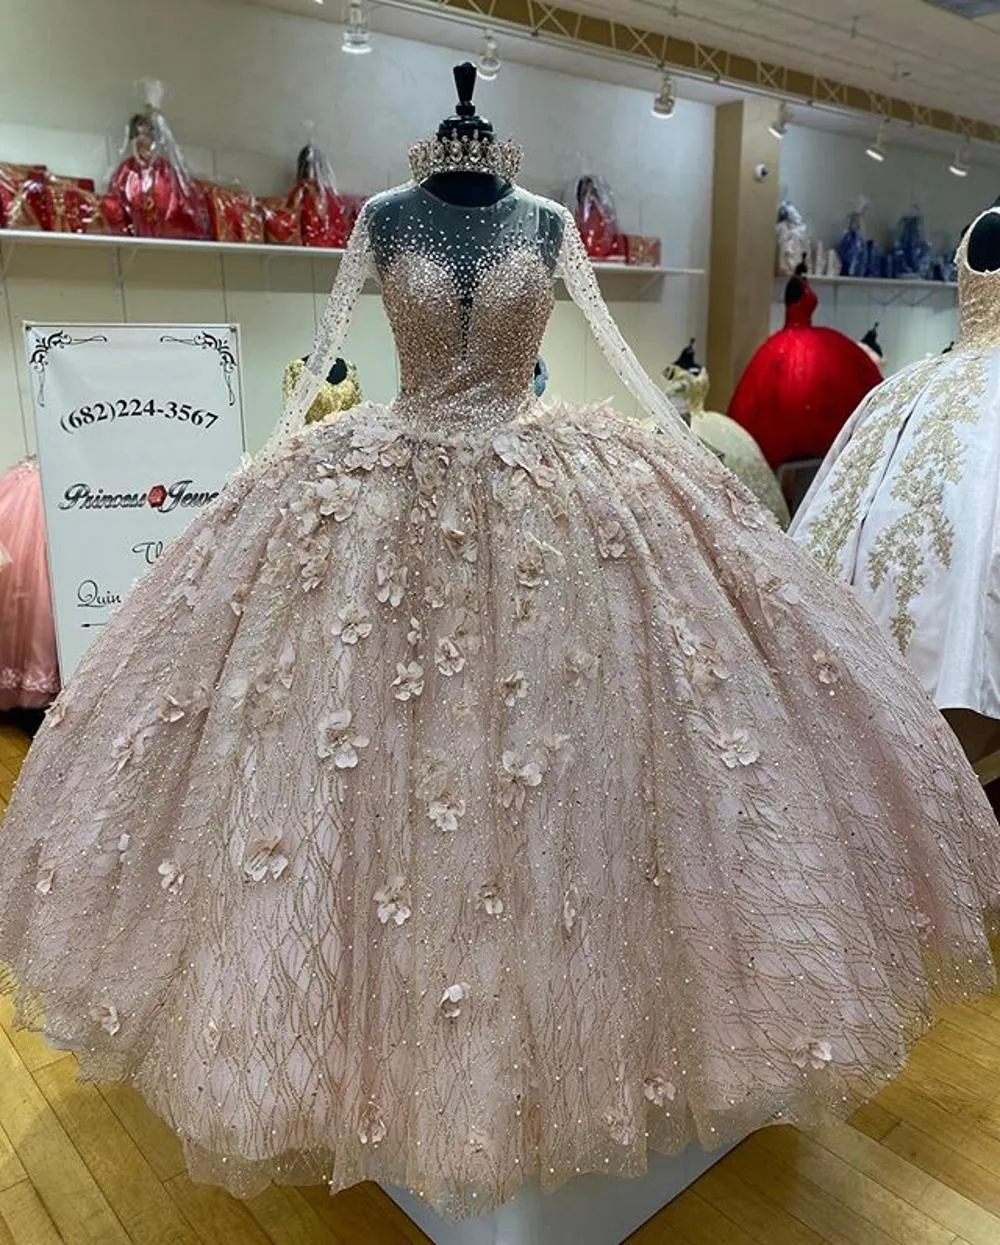 Pink Beading Quinceanera Dresses 3D Floral Long Illusion Sleeves Sequins Crystals Jewel Neck Custom Made Sweet 16 Prom Ball Gowns 403 403